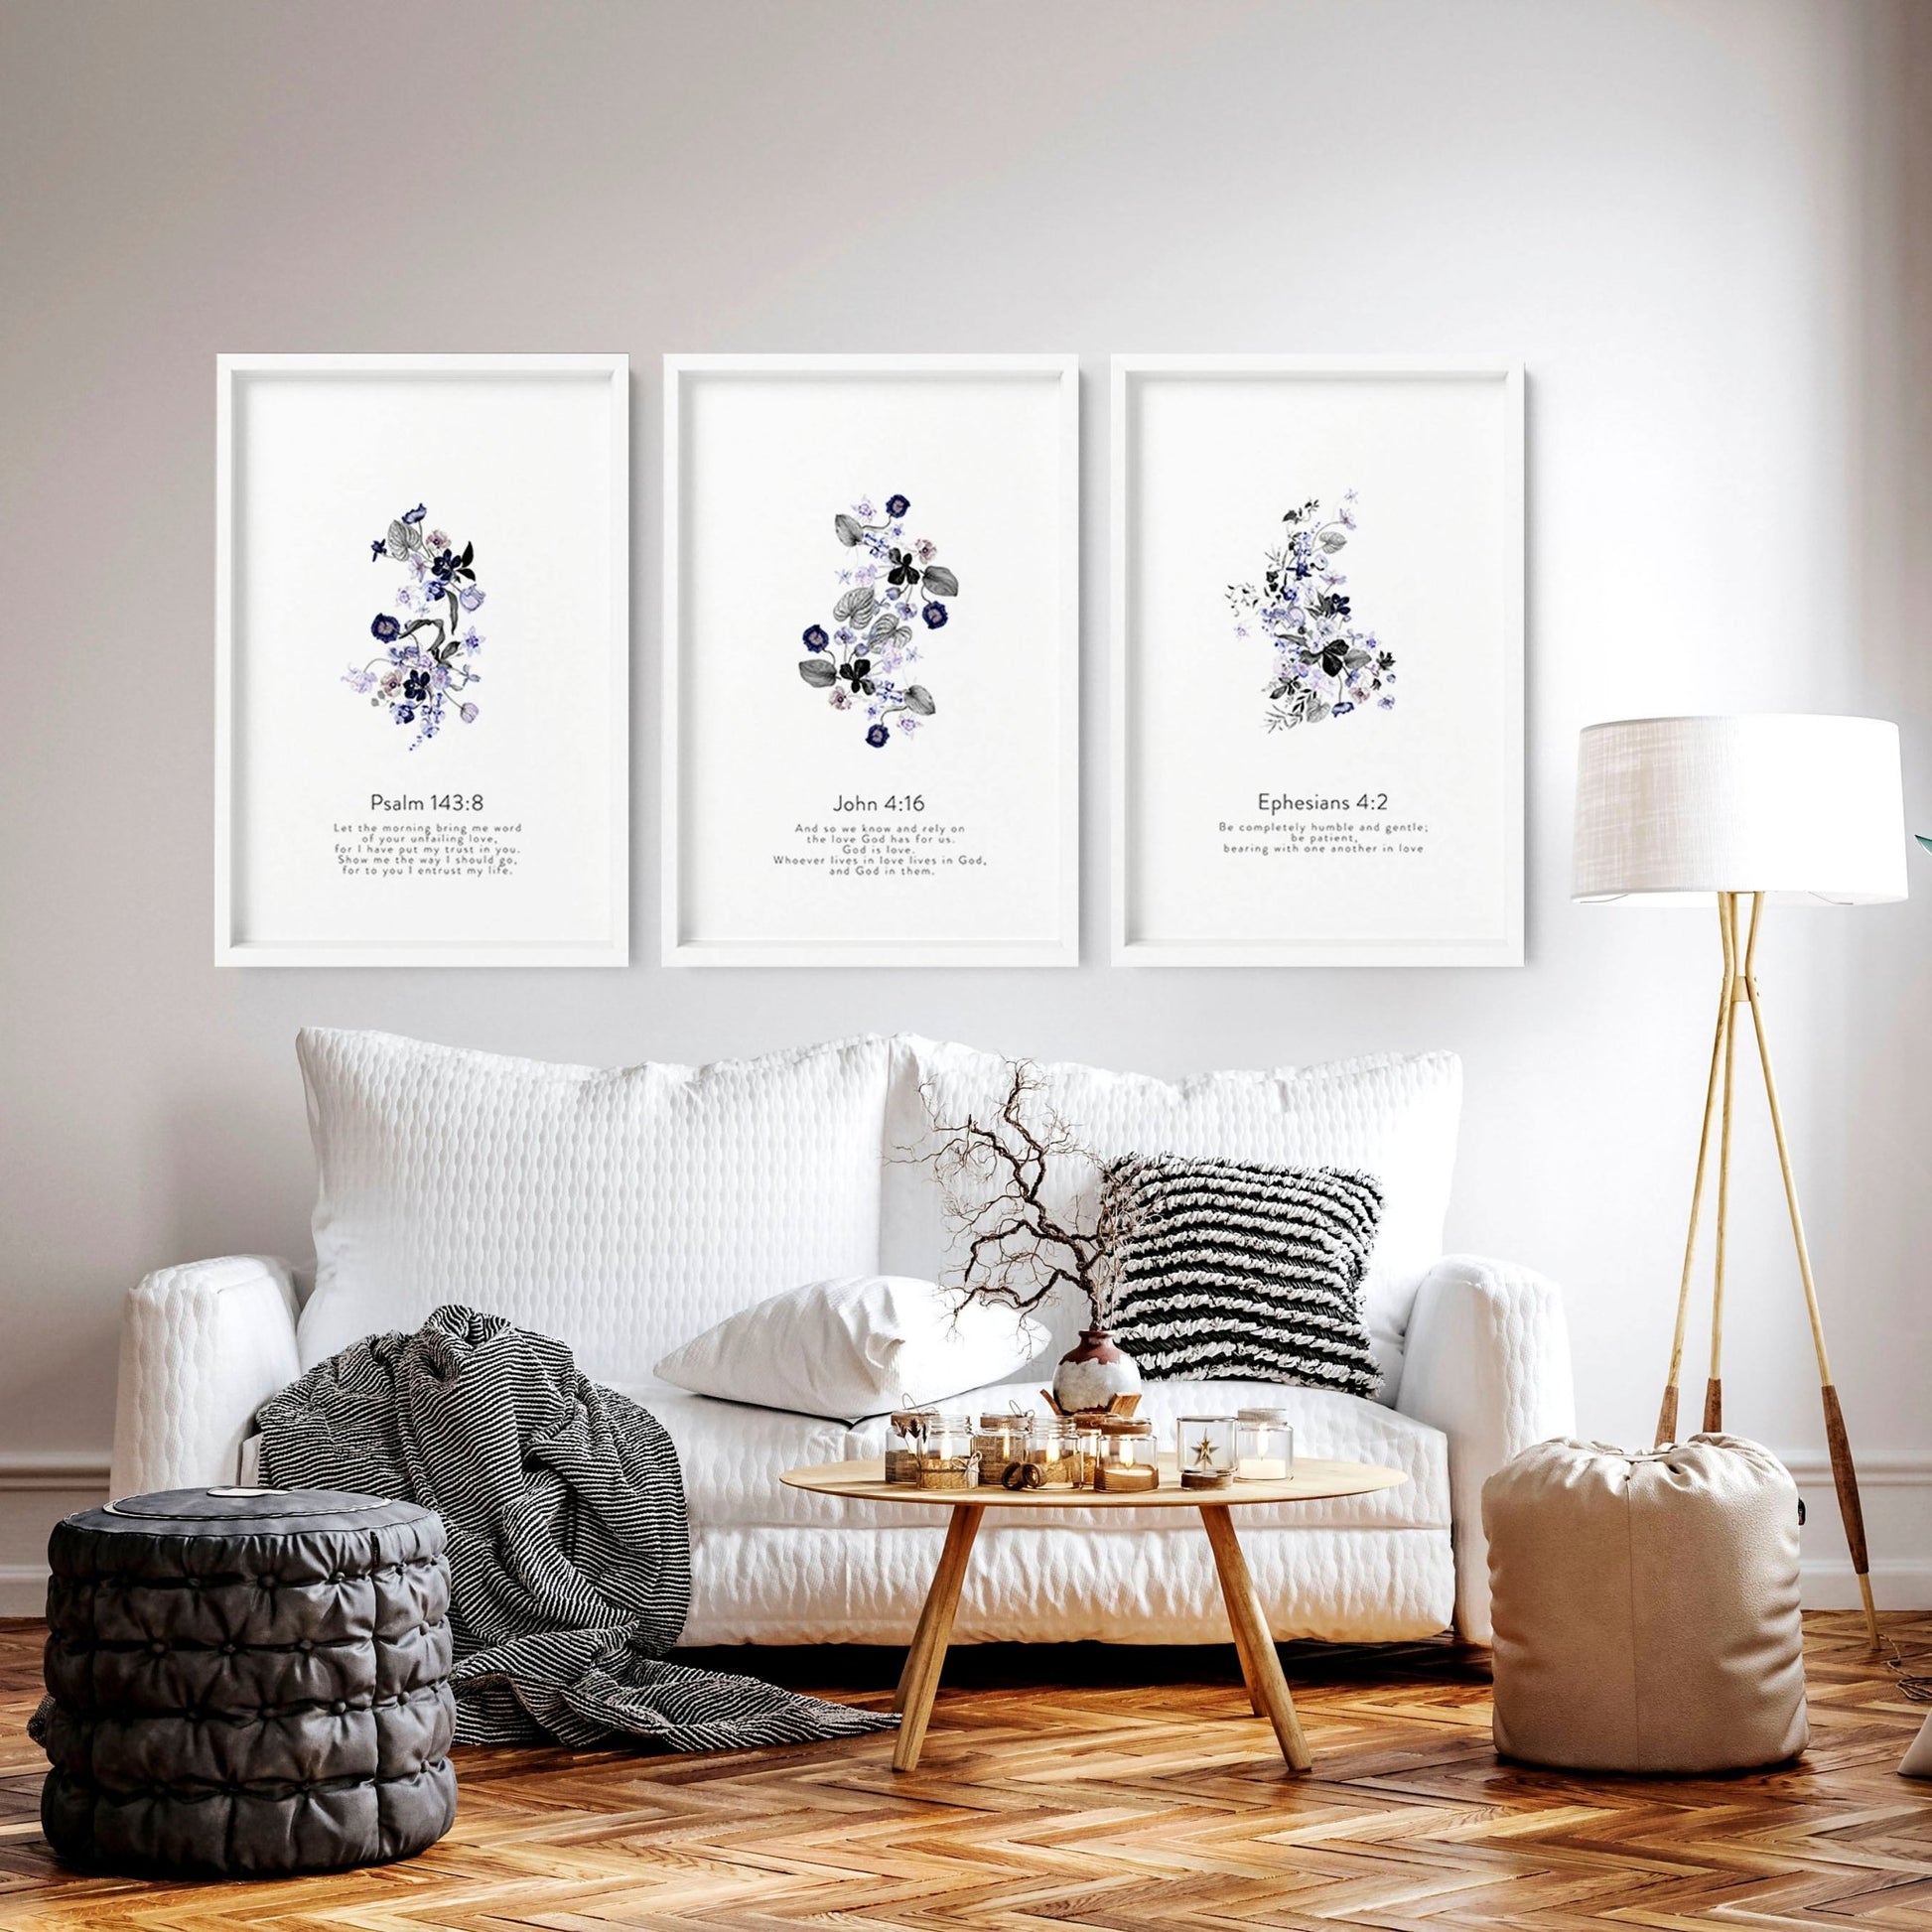 Christianity pictures wall art for living room | set of 3 wall art prints